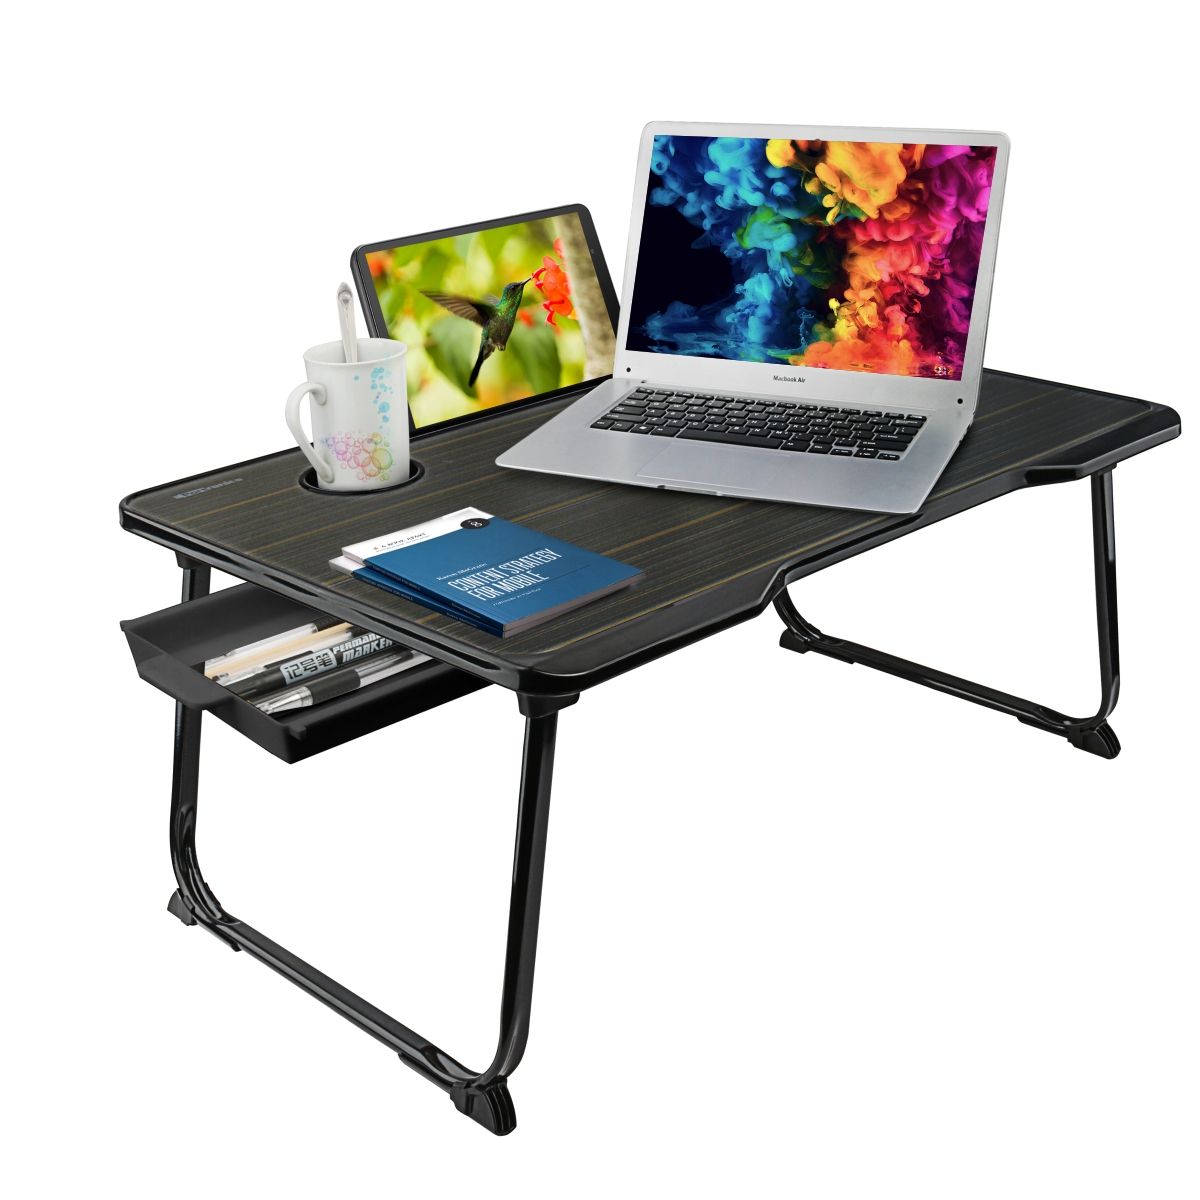 Portronics My Buddy One Plus Por-1191 Multifunctional Laptop Table For Office Home Bed (black)